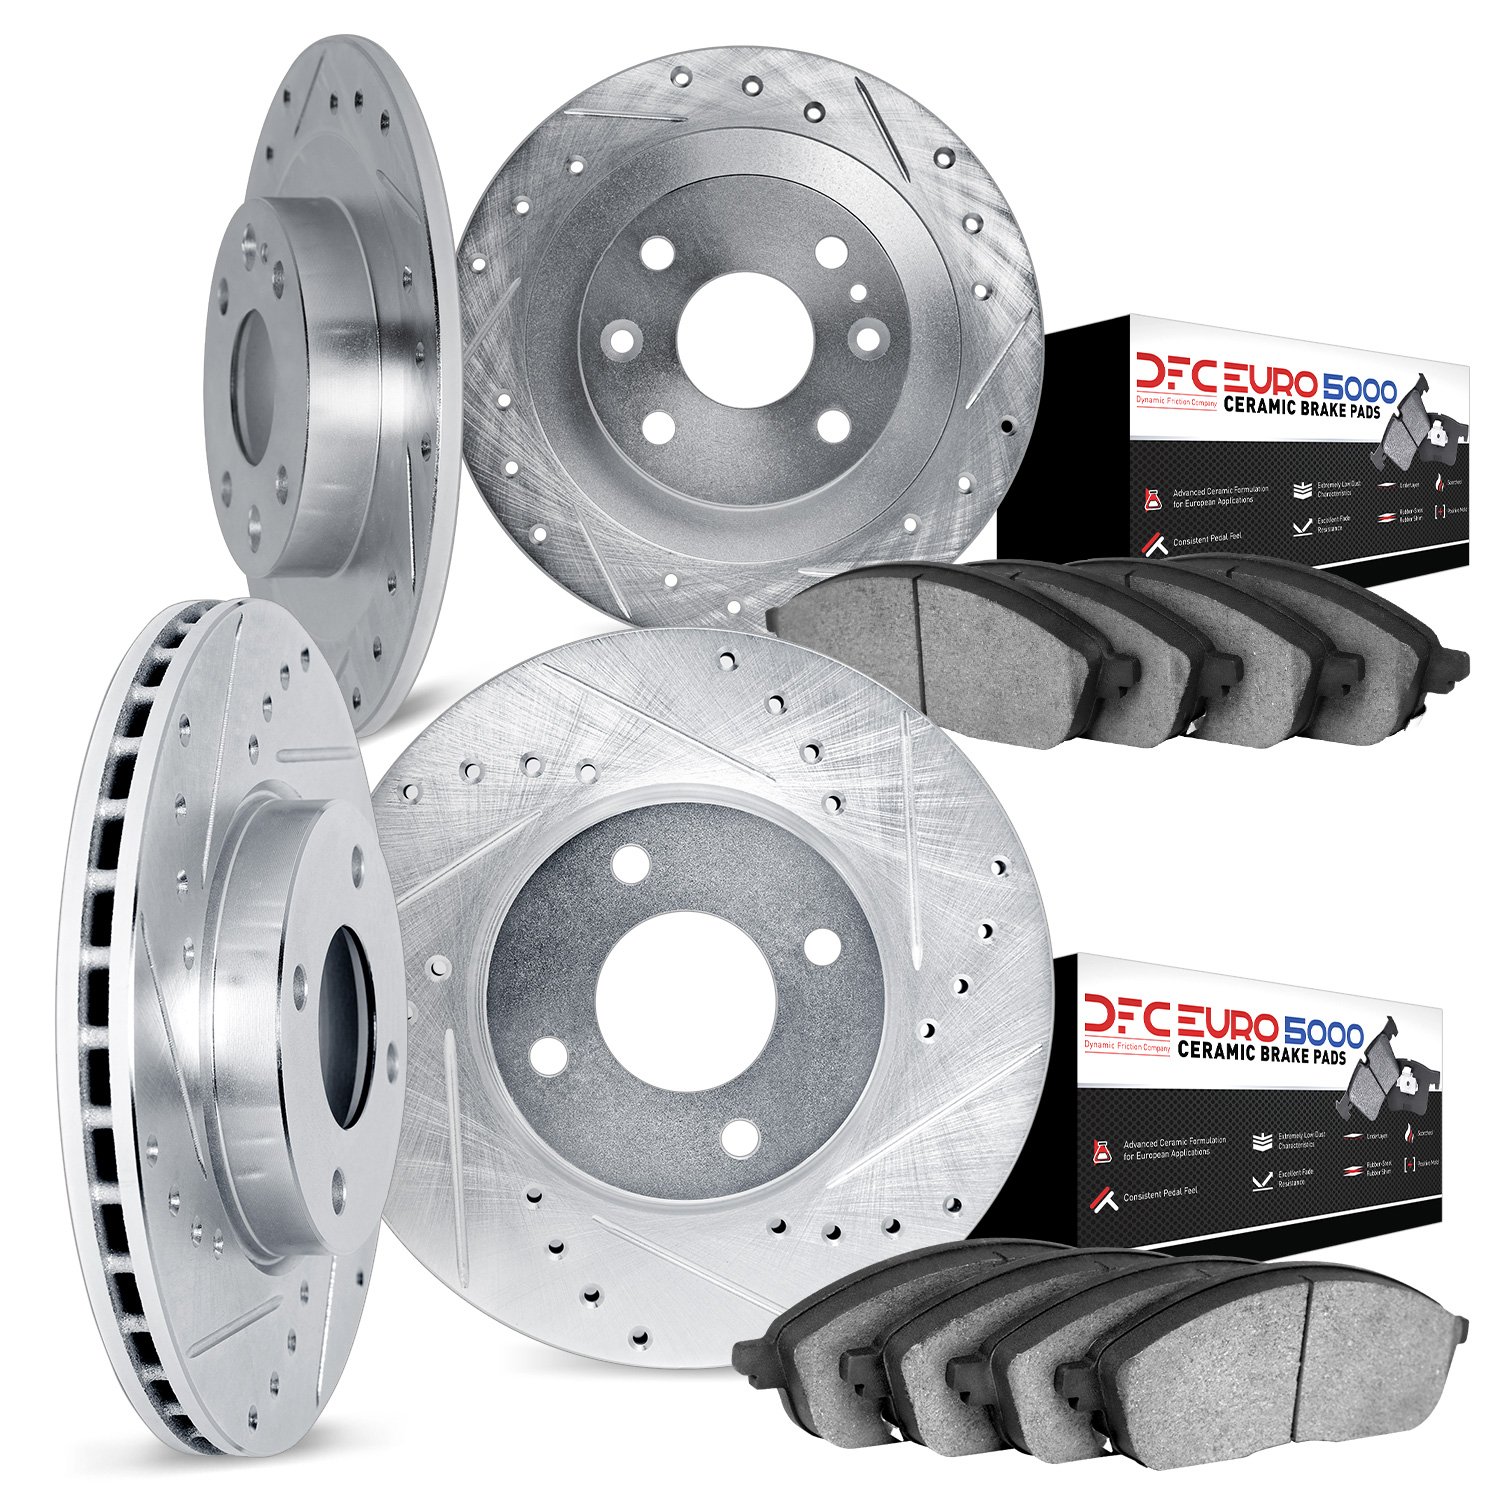 7604-65000 Drilled/Slotted Brake Rotors w/5000 Euro Ceramic Brake Pads Kit [Silver], 1988-1998 GM, Position: Front and Rear